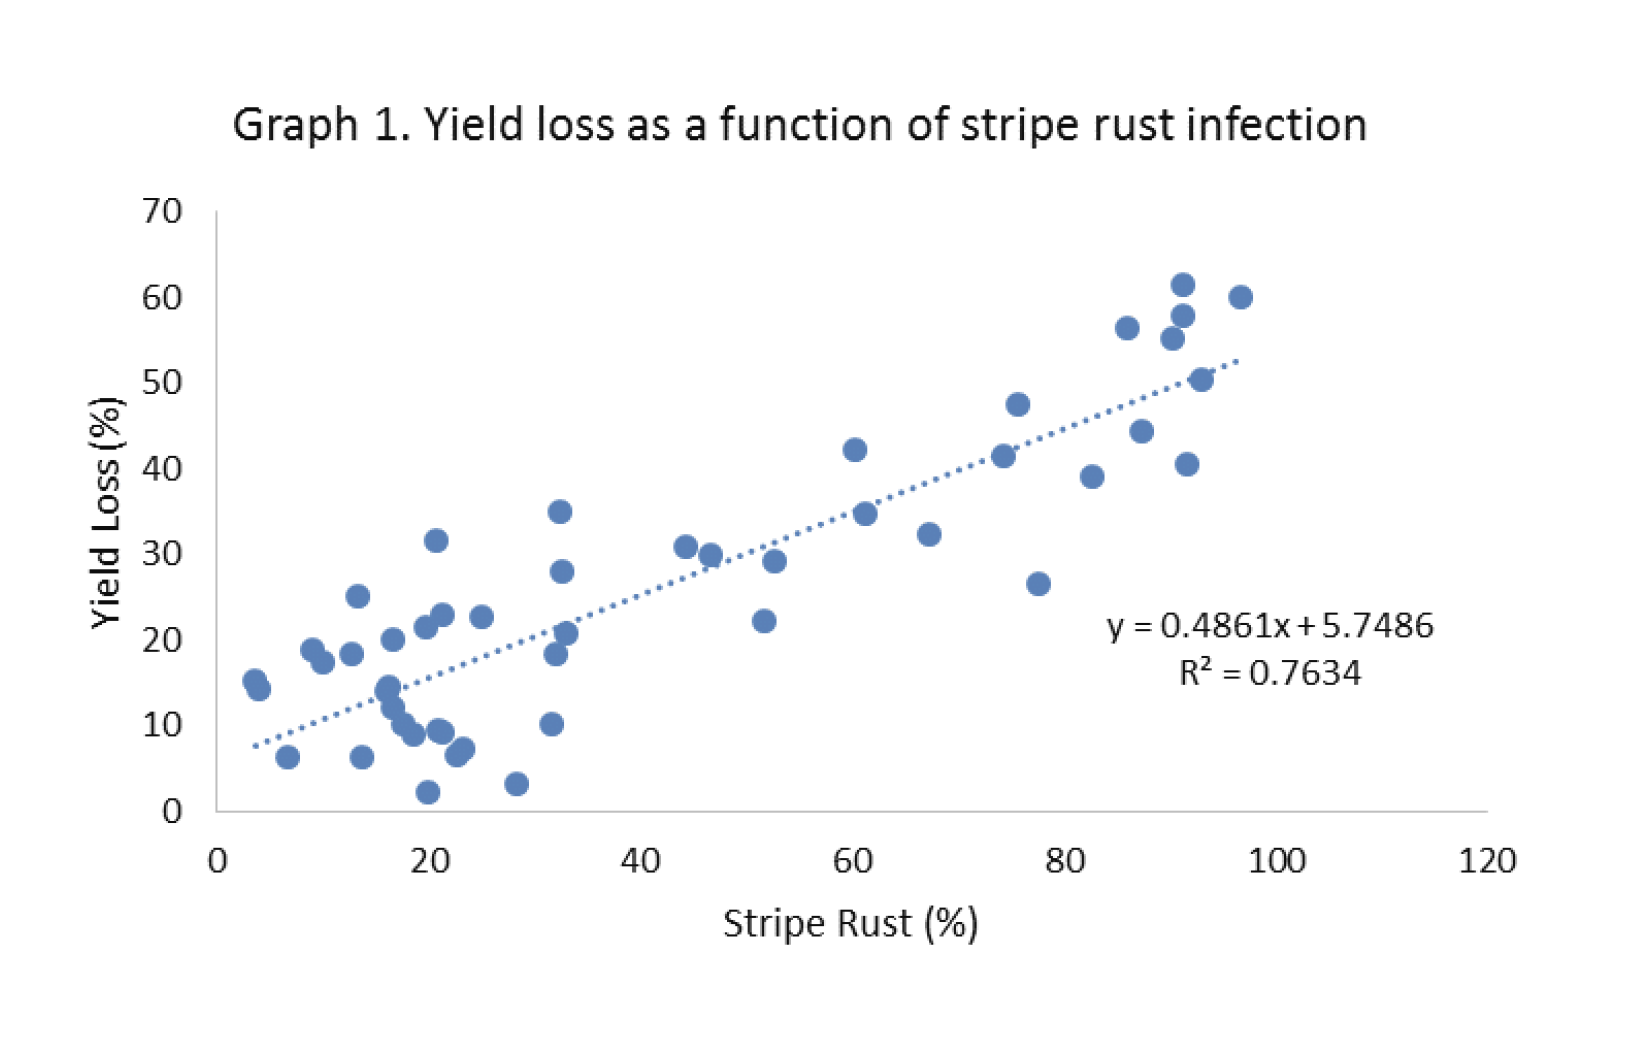 yield loss as a function of stripe rust